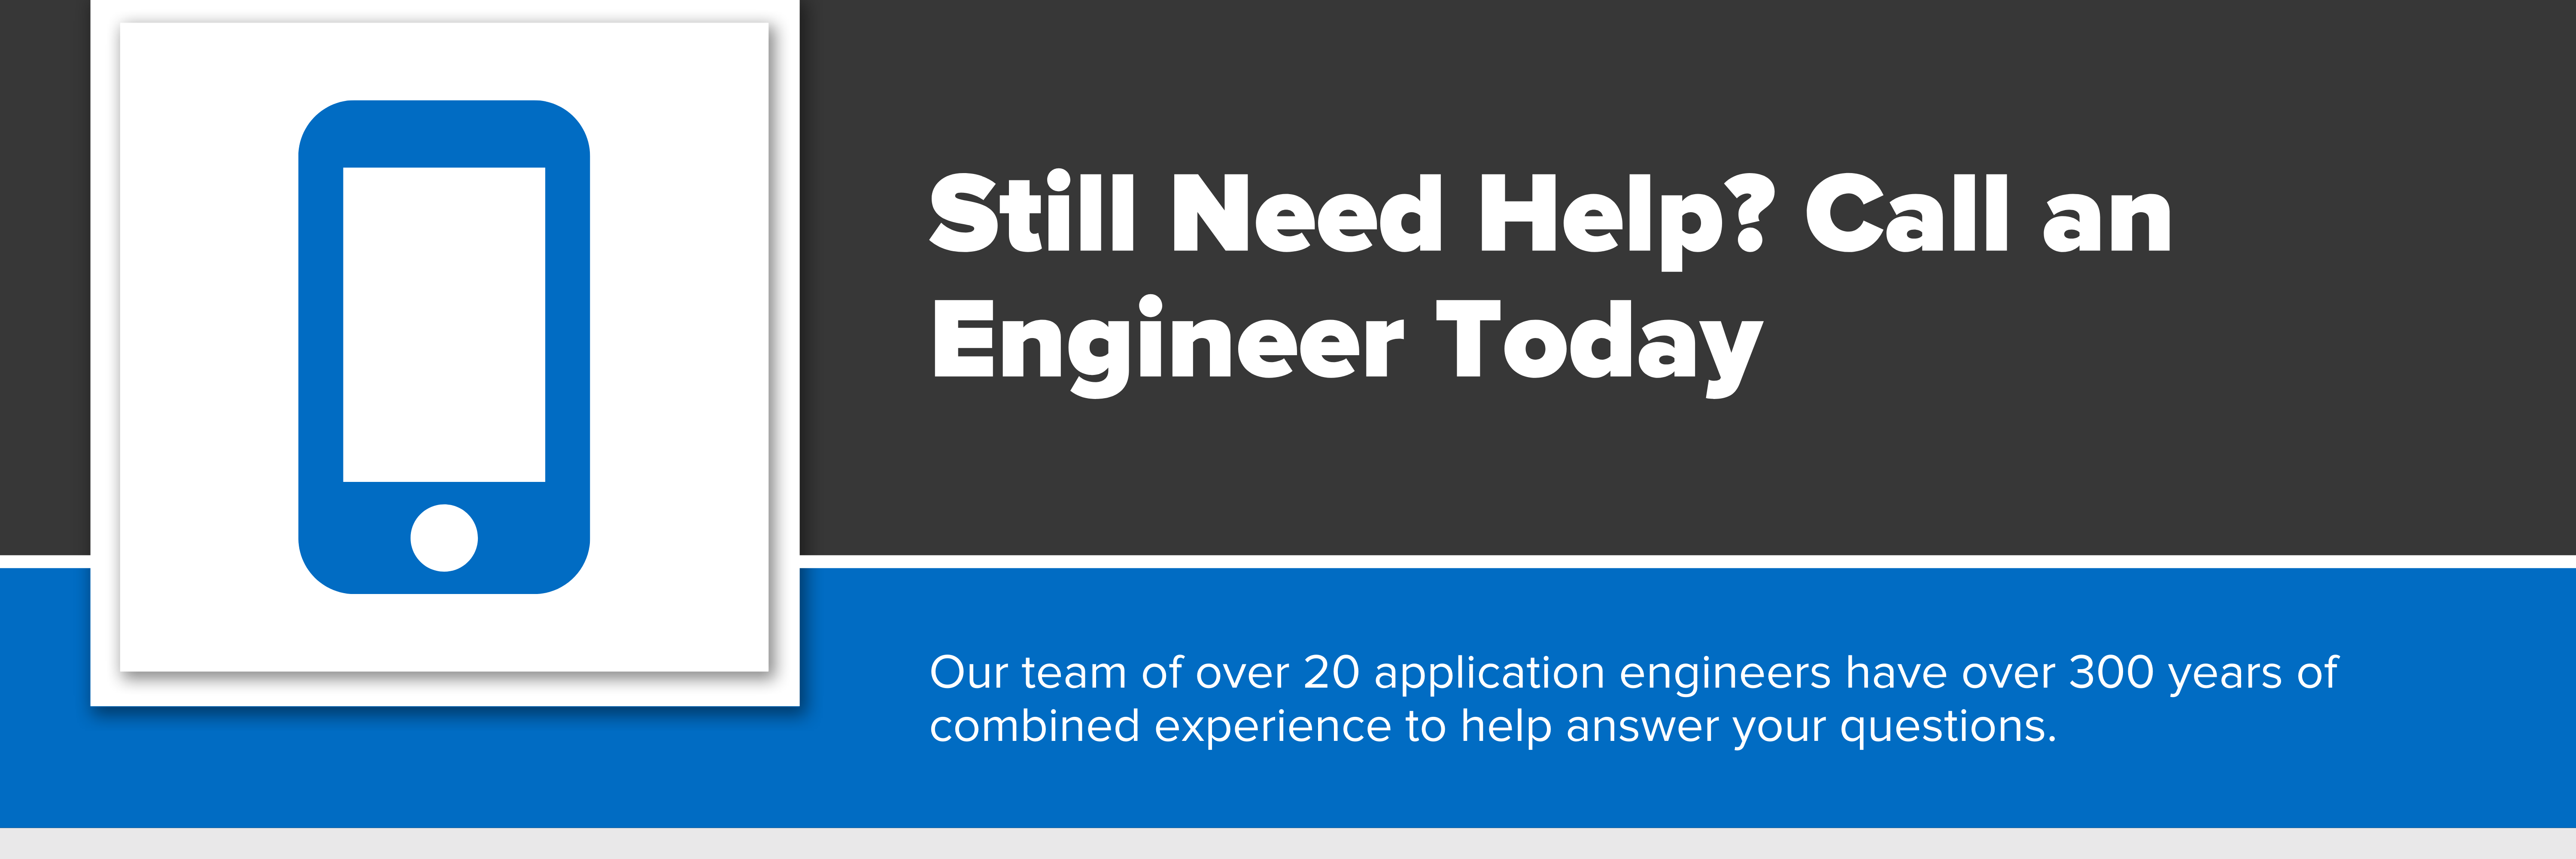 Header image with text "Still Need Help? Call an Engineer Today.